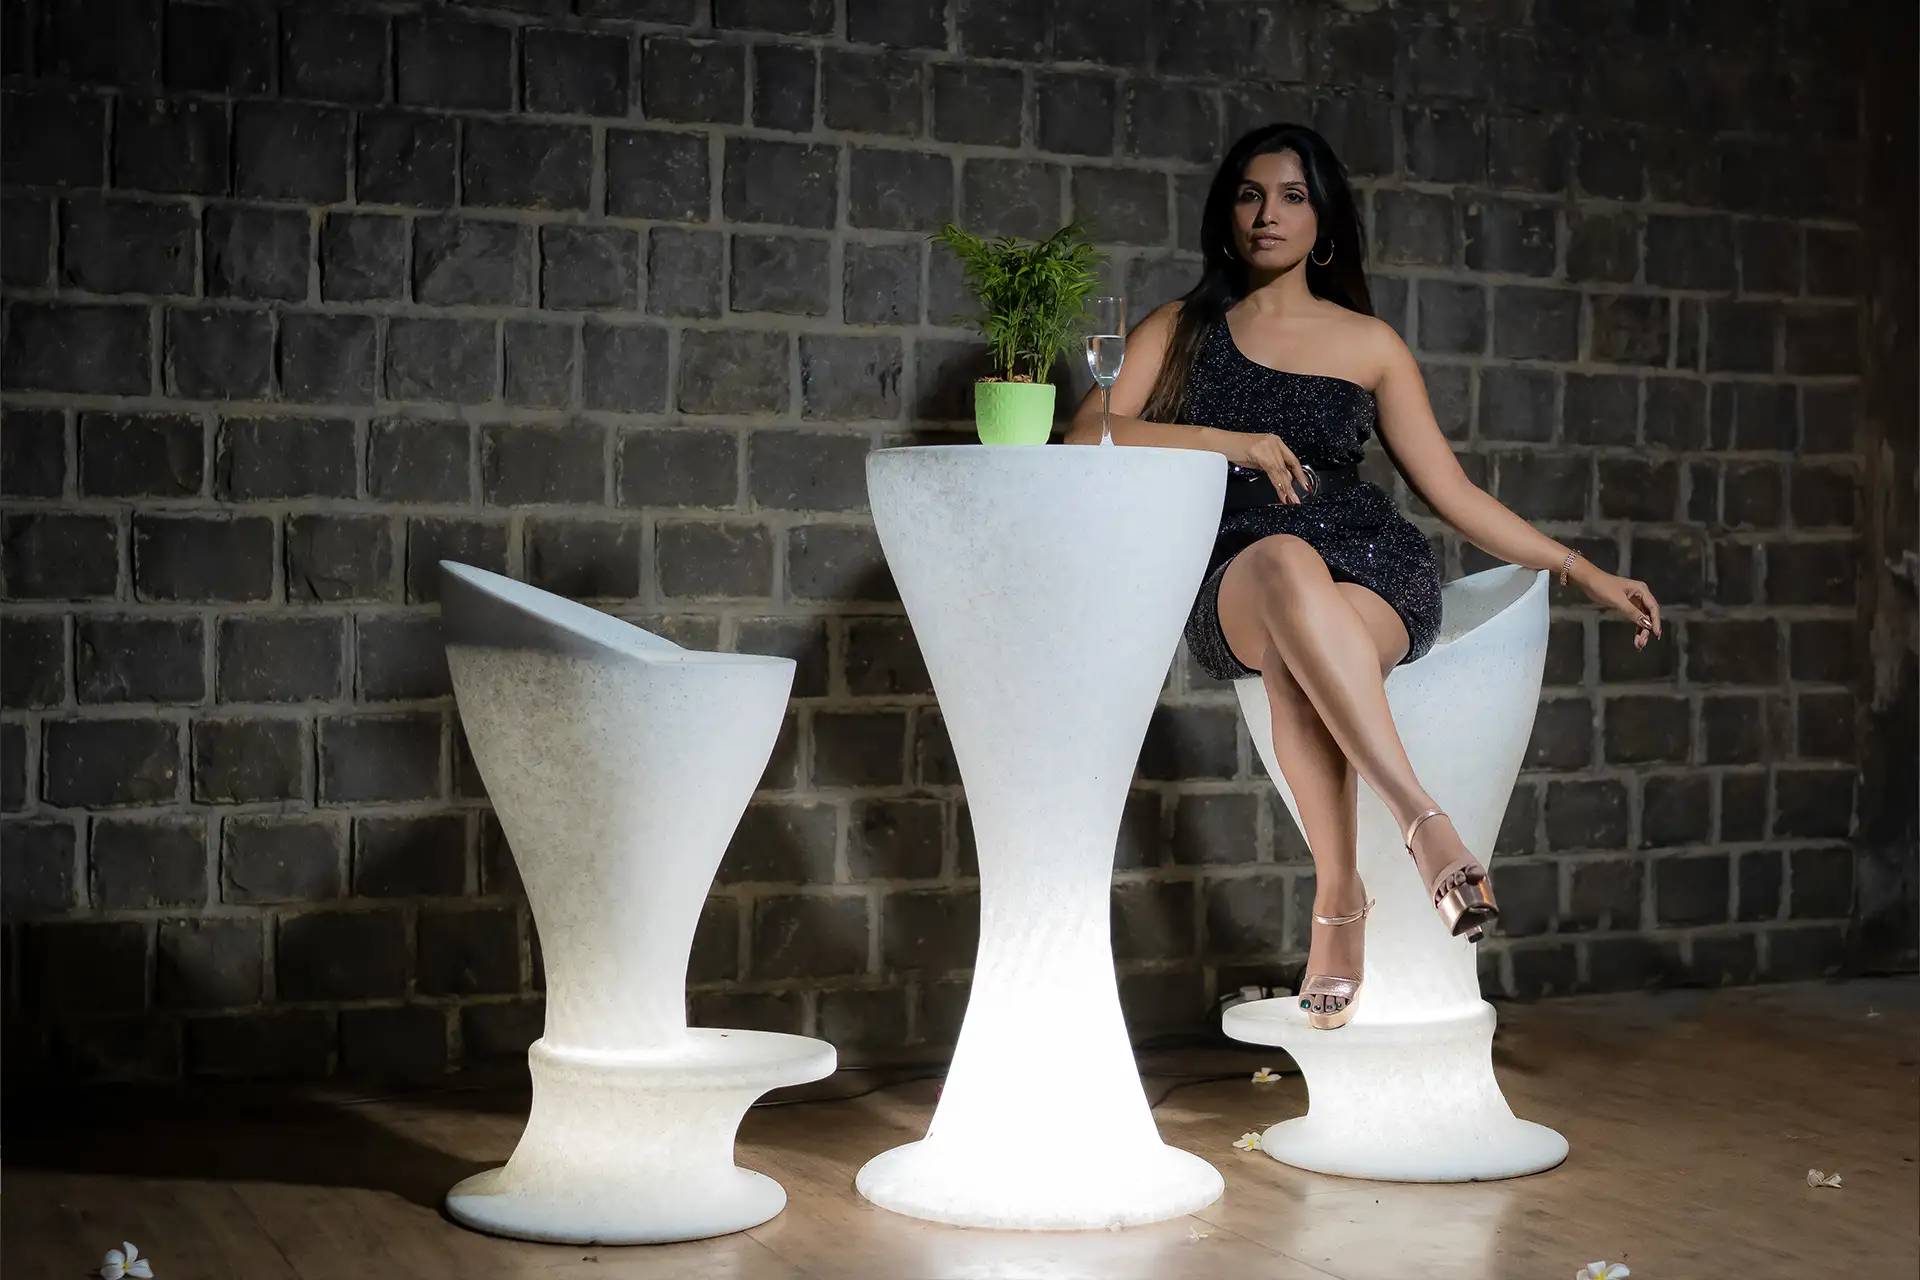 Estela Illuminated Recyclable Plastic Stool, led bar stools and tables, garden furniture, recycled furniture, plastic furniture, garden furniture waterproof, Garden furniture, Garden furniture sets, Illuminated garden furniture, Waterproof garden furniture, Outdoor furniture, Modern outdoor furniture for small spaces